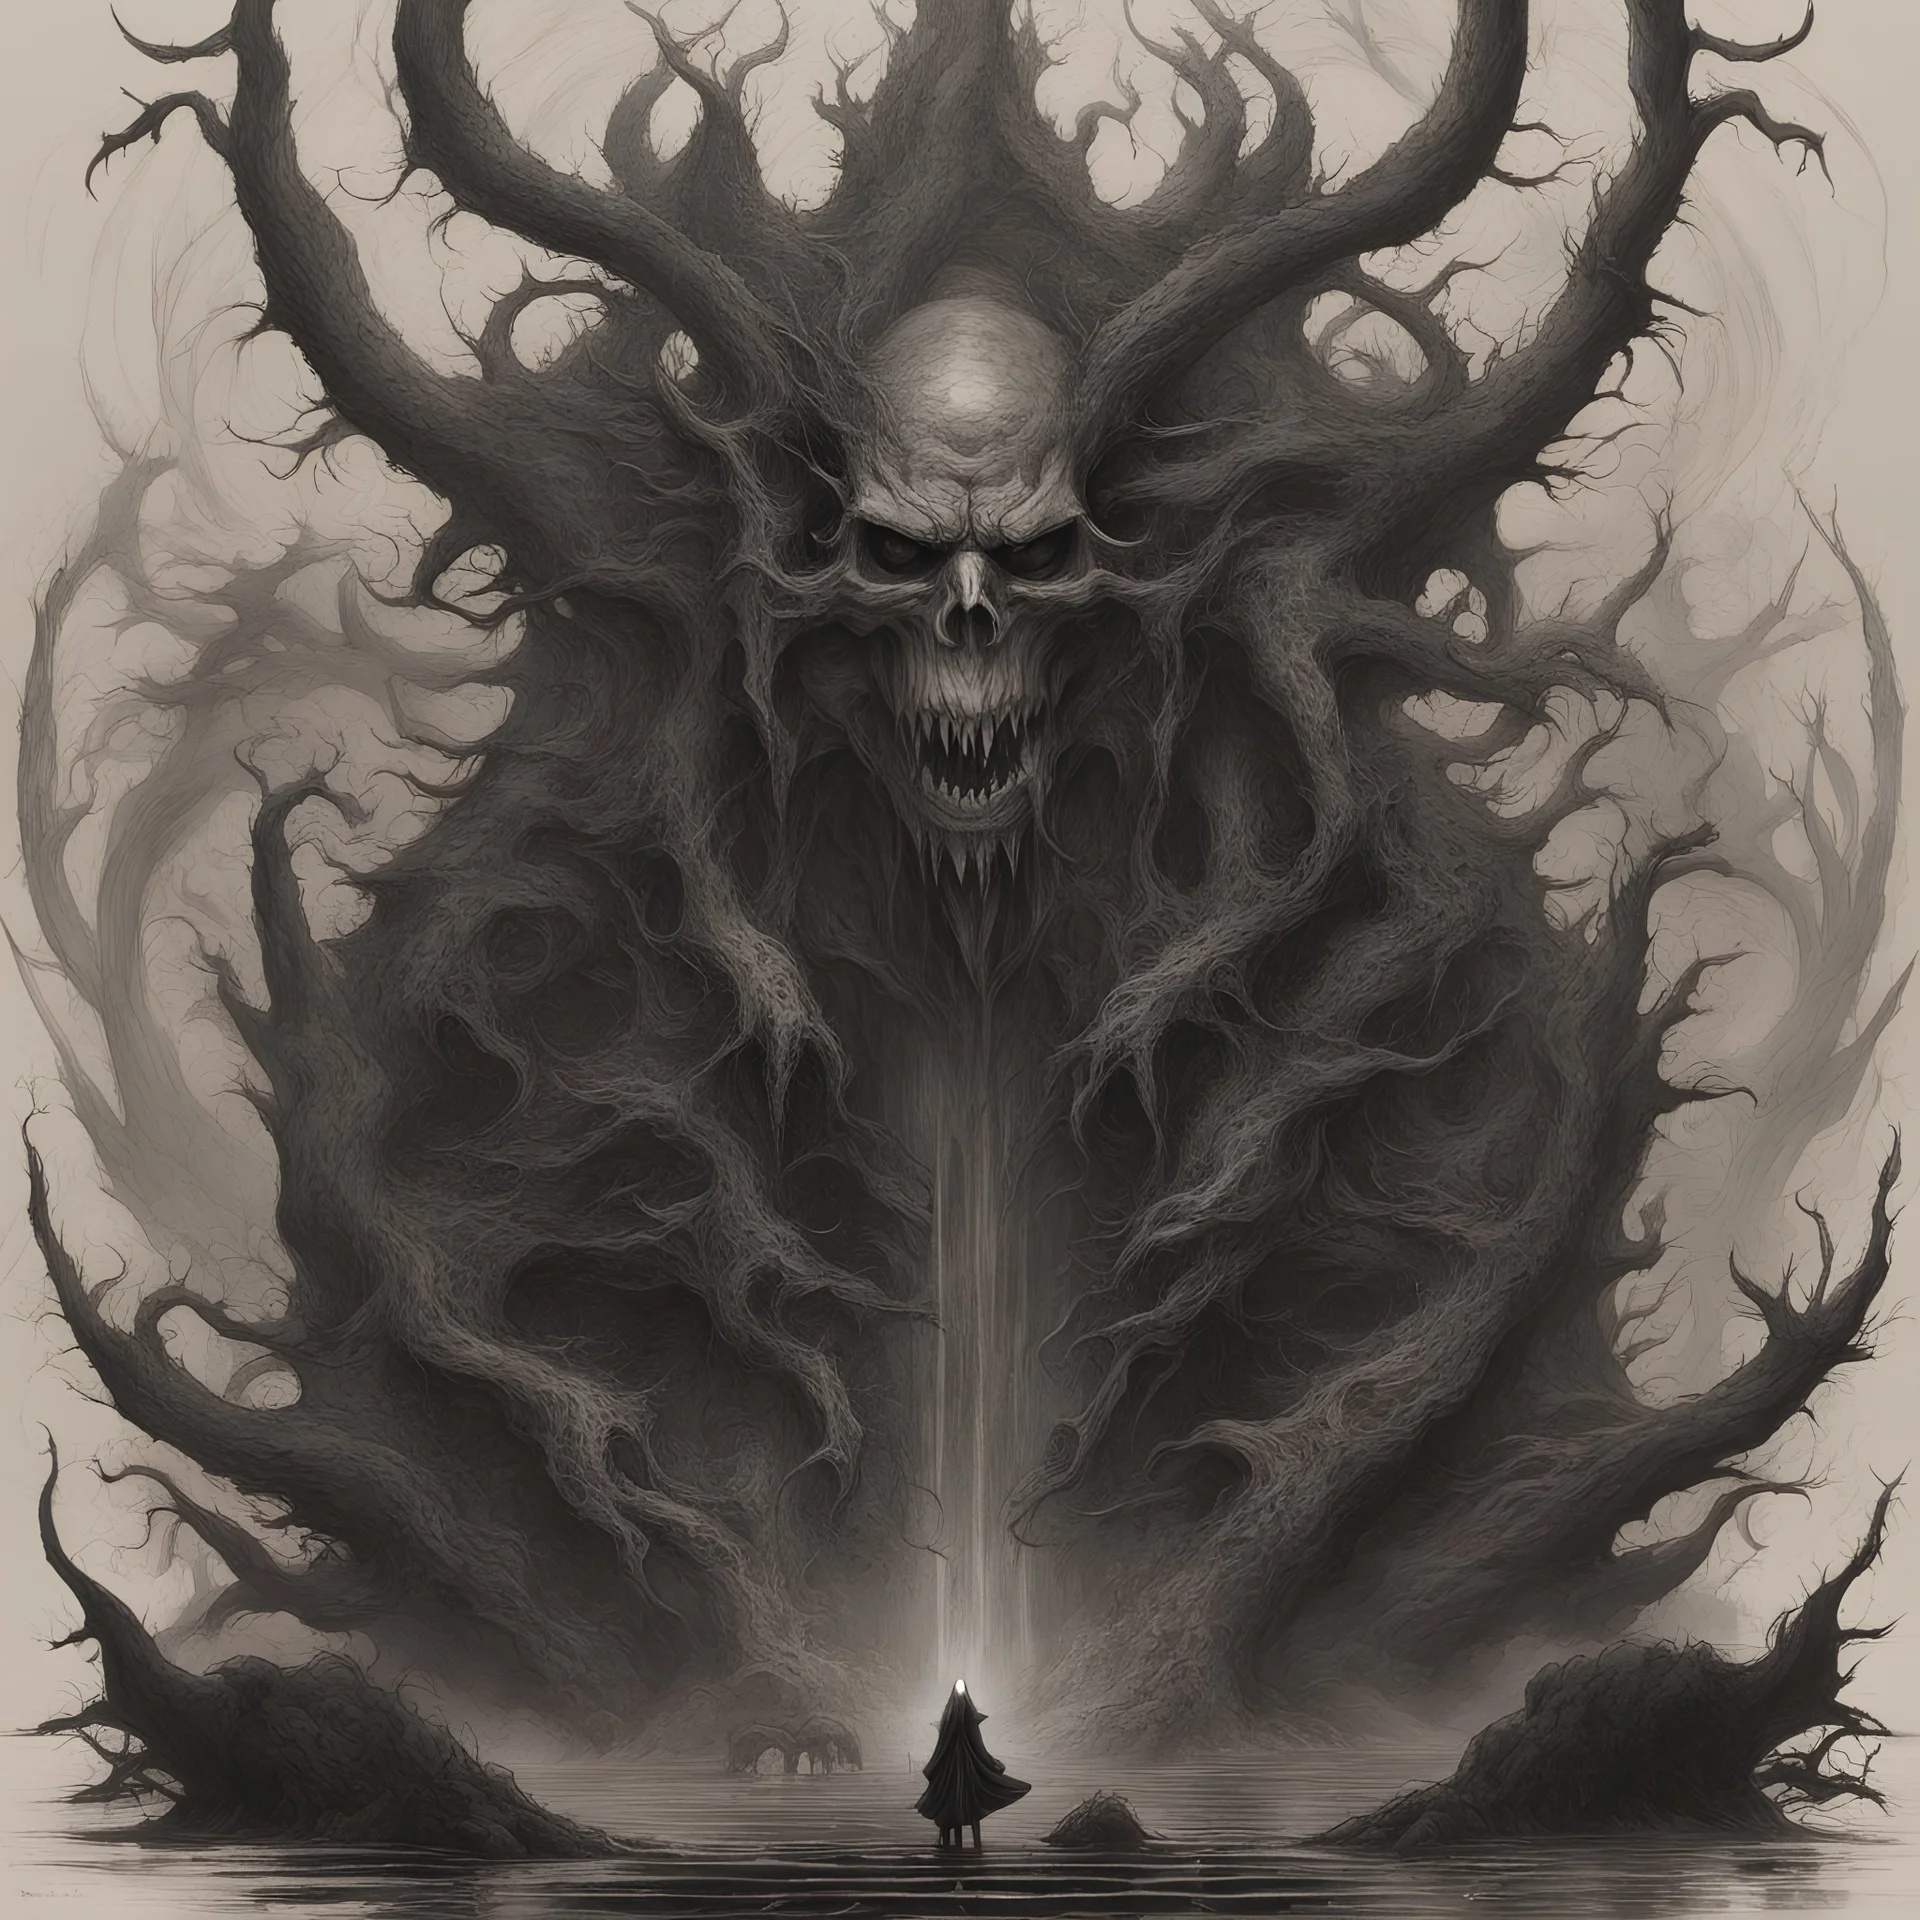 Generate a visually striking artwork that depicts 'Abaddon' as a formidable and malevolent entity drawing inspiration from dark mythology and biblical references. Incorporate elements of chaos, destruction, and a foreboding atmosphere, while highlighting Abaddon's menacing presence and otherworldly power.